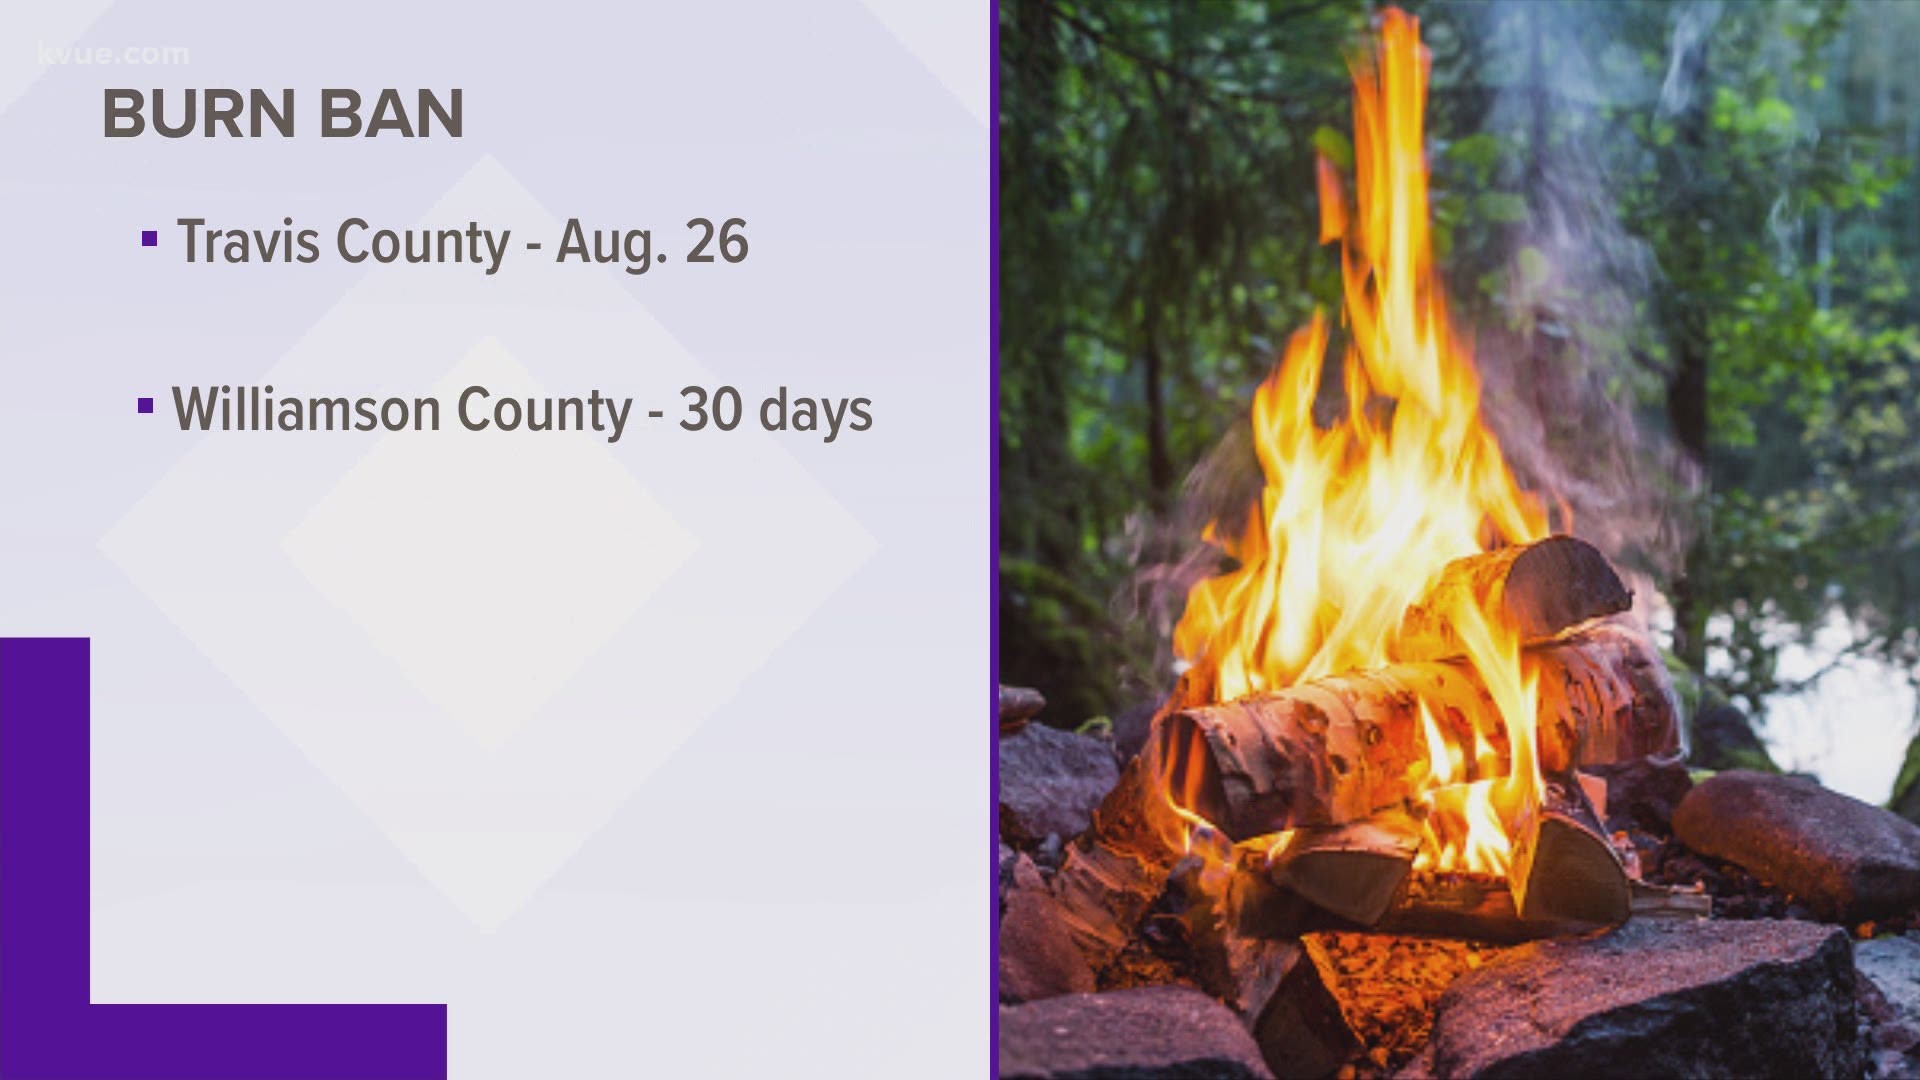 Travis and Williamson counties both issued burn bans starting Tuesday.